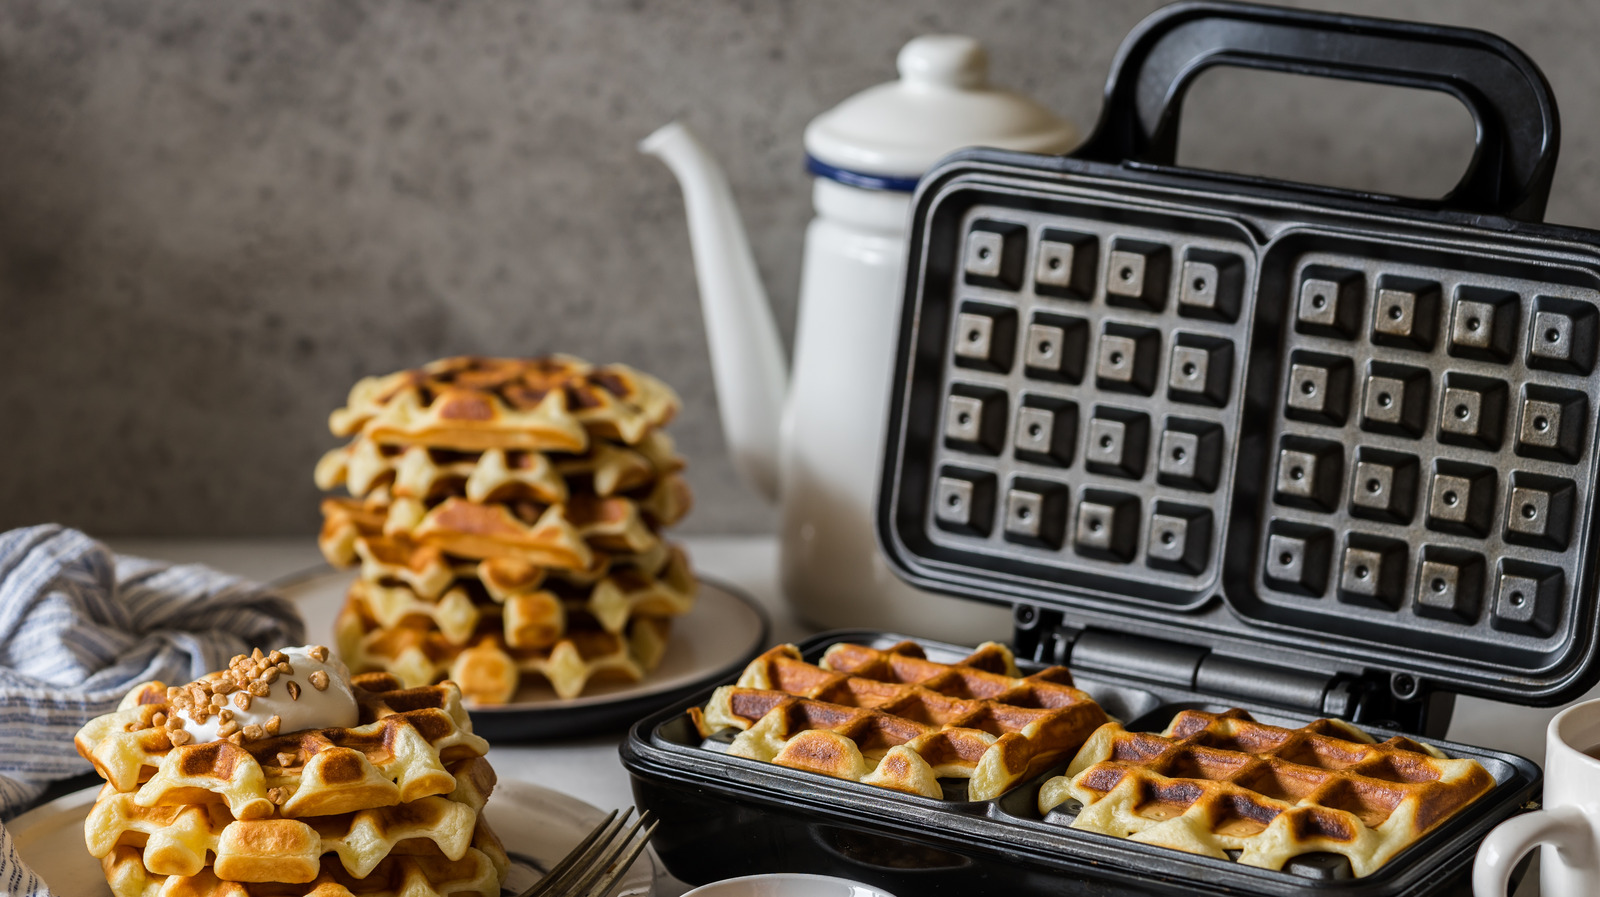 How to Deep-Clean Your Waffle Maker Without Damaging It